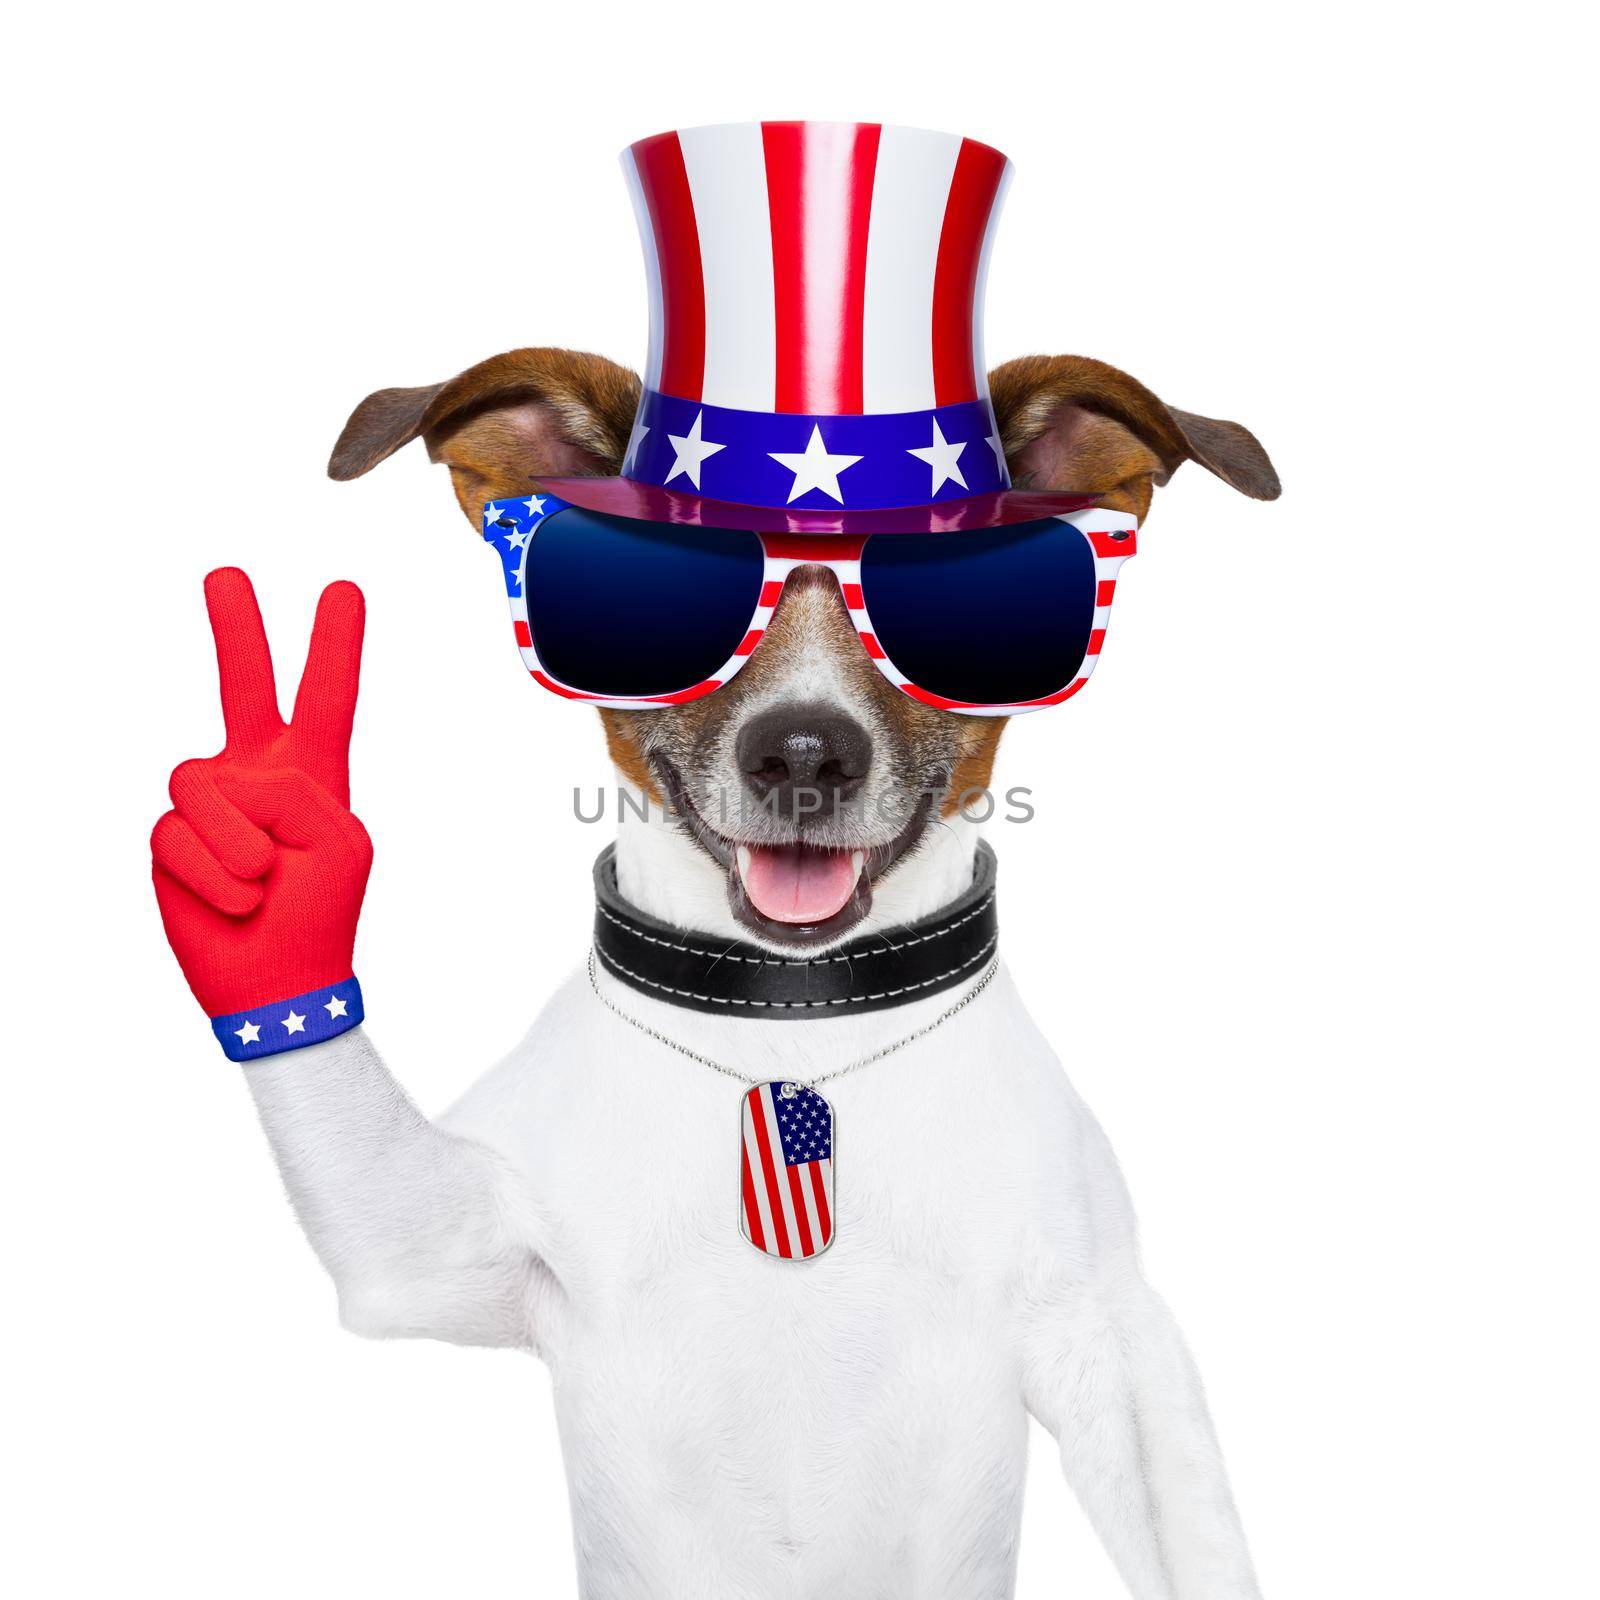 american peace dog with victory fingers gloves